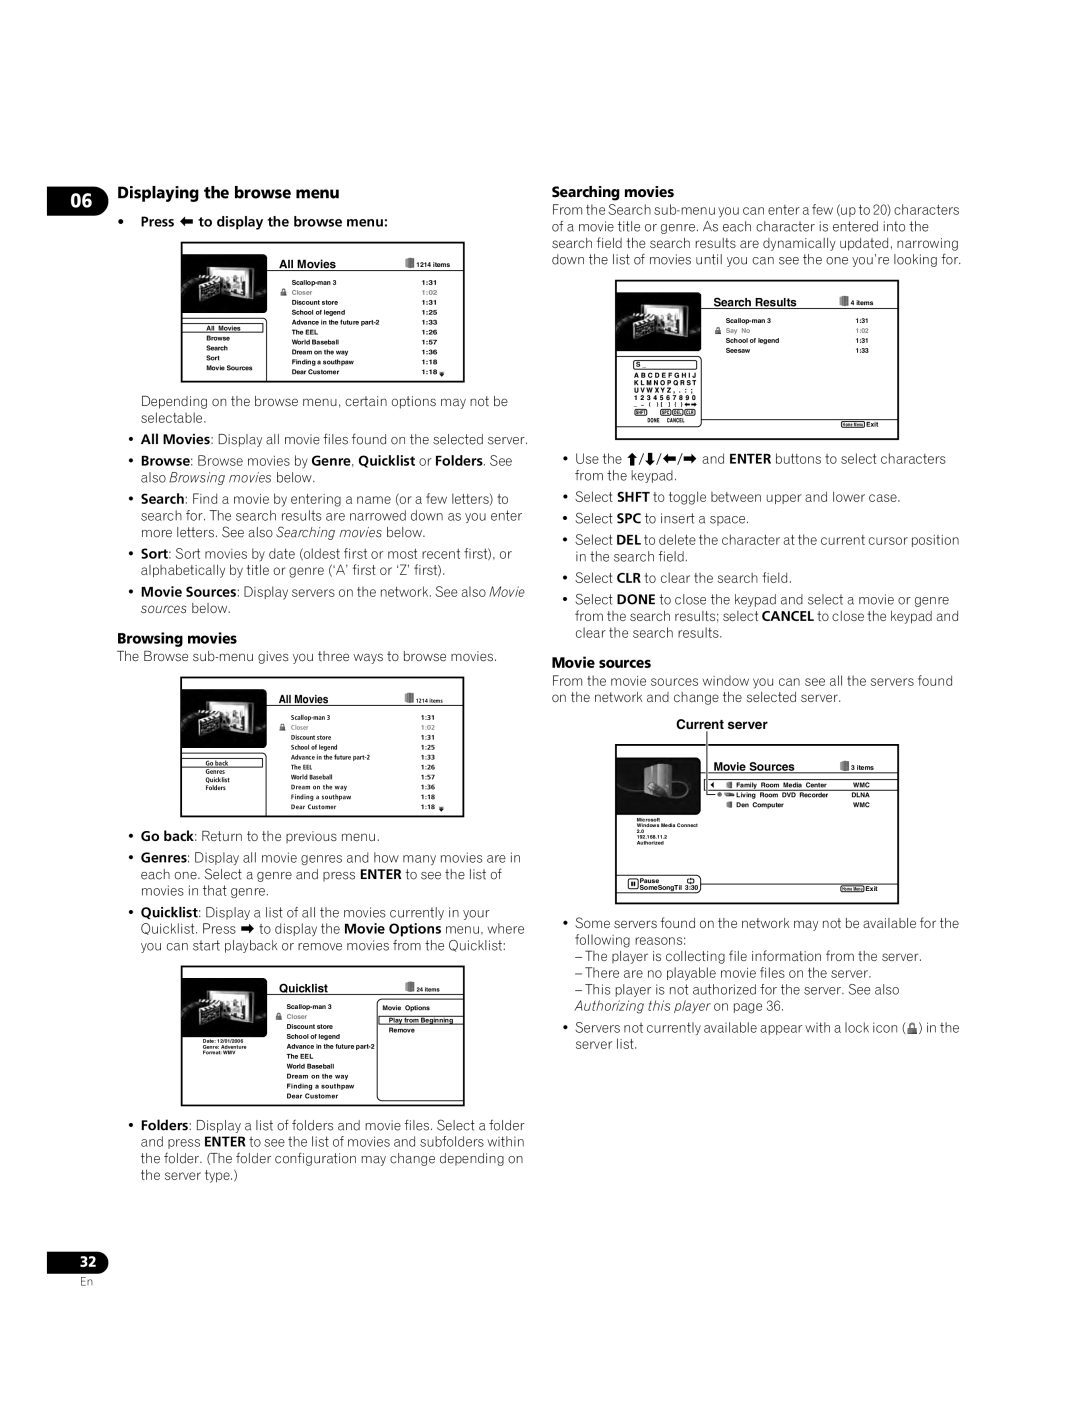 Pioneer BDP-LX70A operating instructions Displaying the browse menu, Current server 